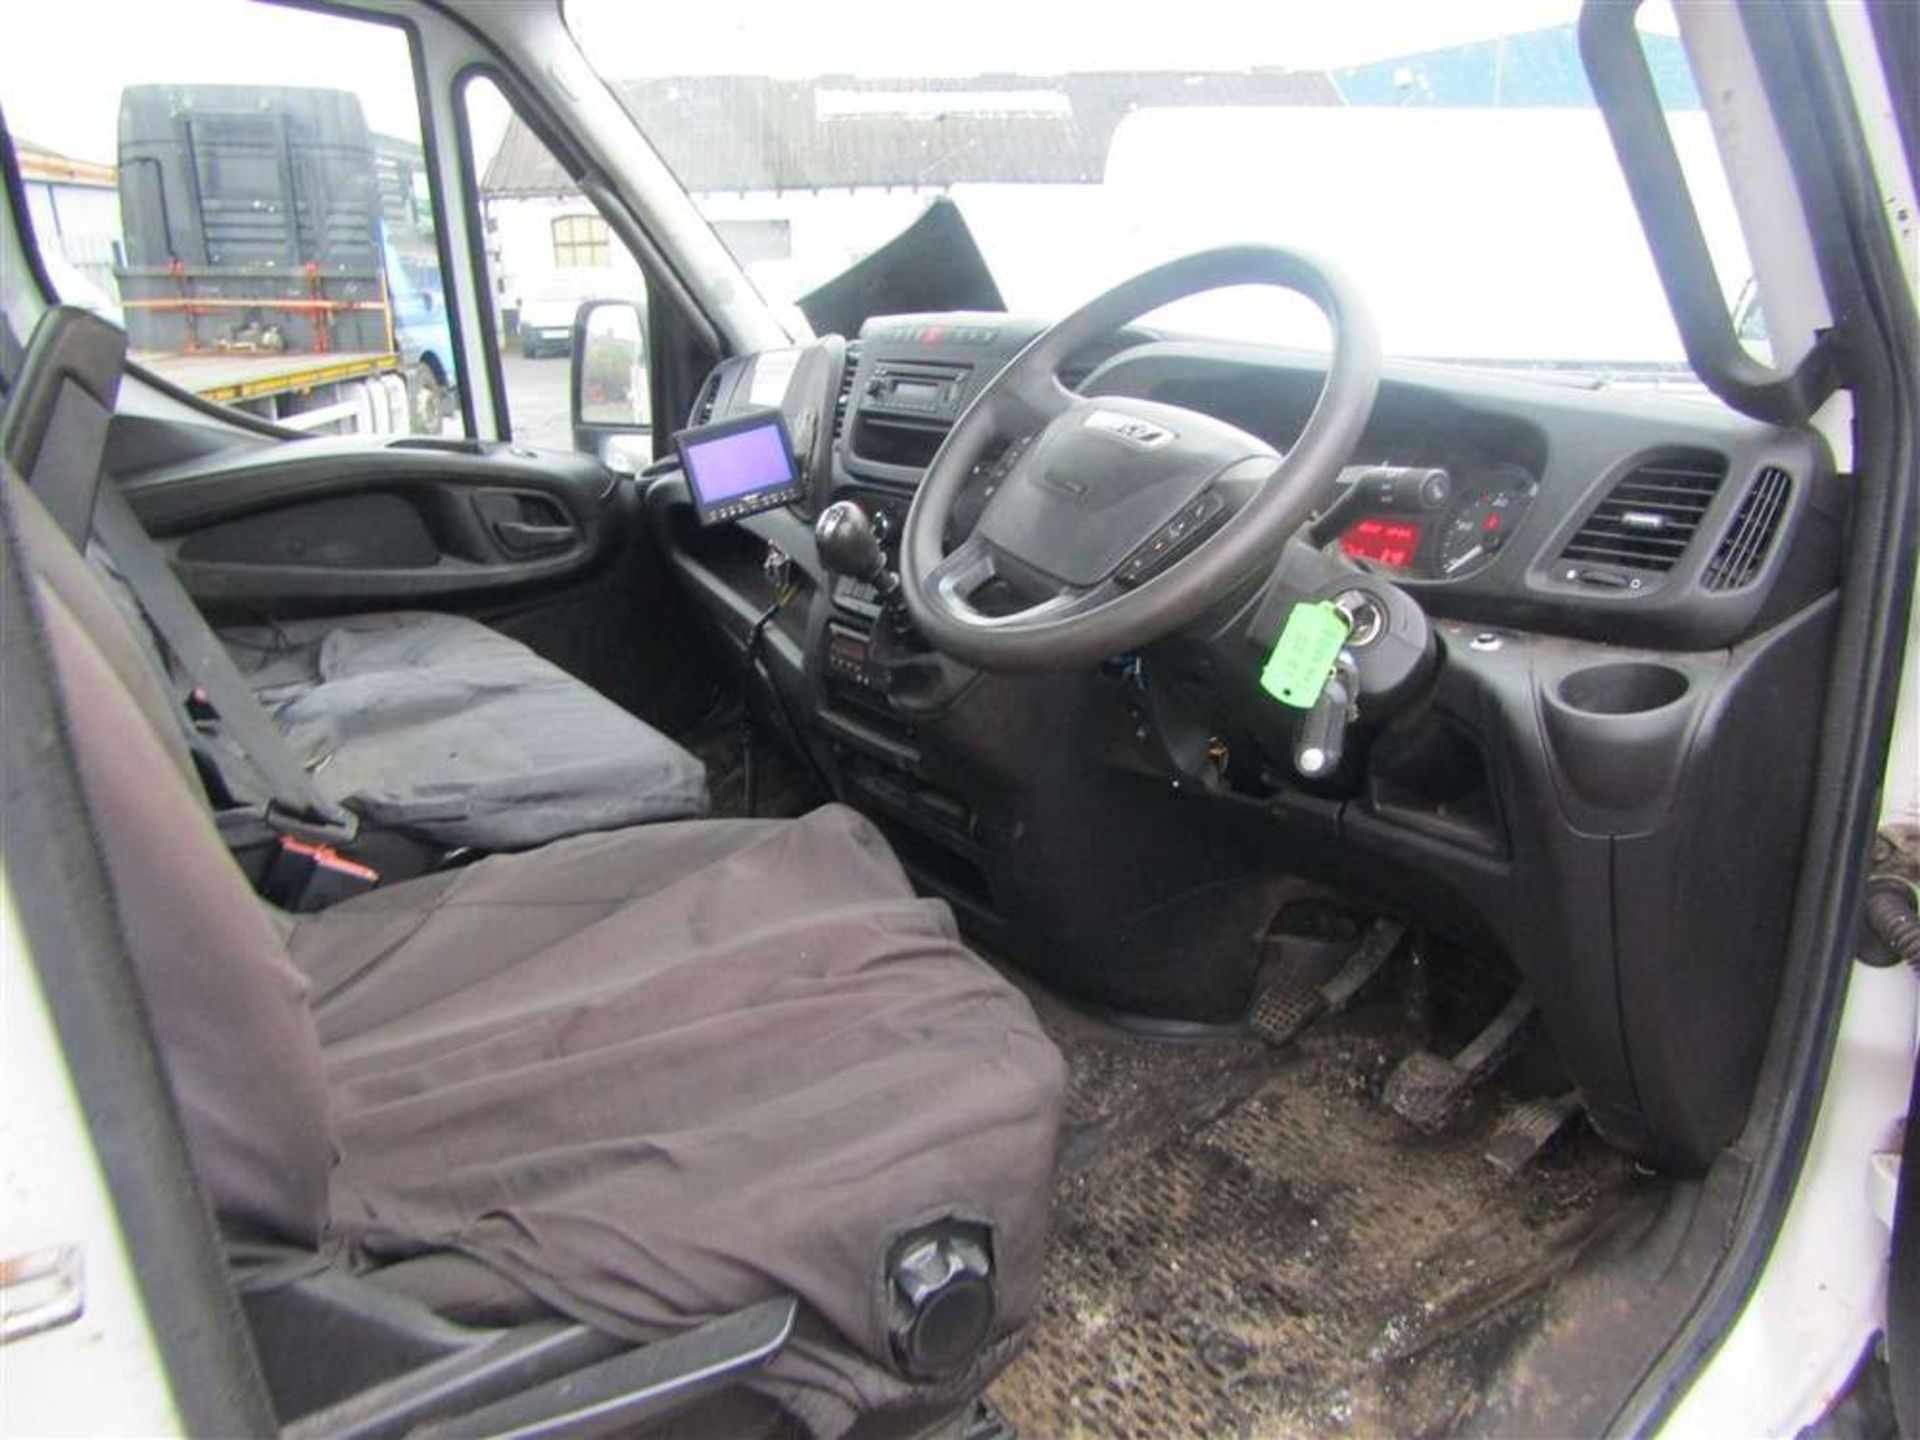 2018 68 reg Iveco Daily 70C18 Tipper (Runs & Drives but Starter / Clutch Issues) (Direct Council) - Image 5 of 6